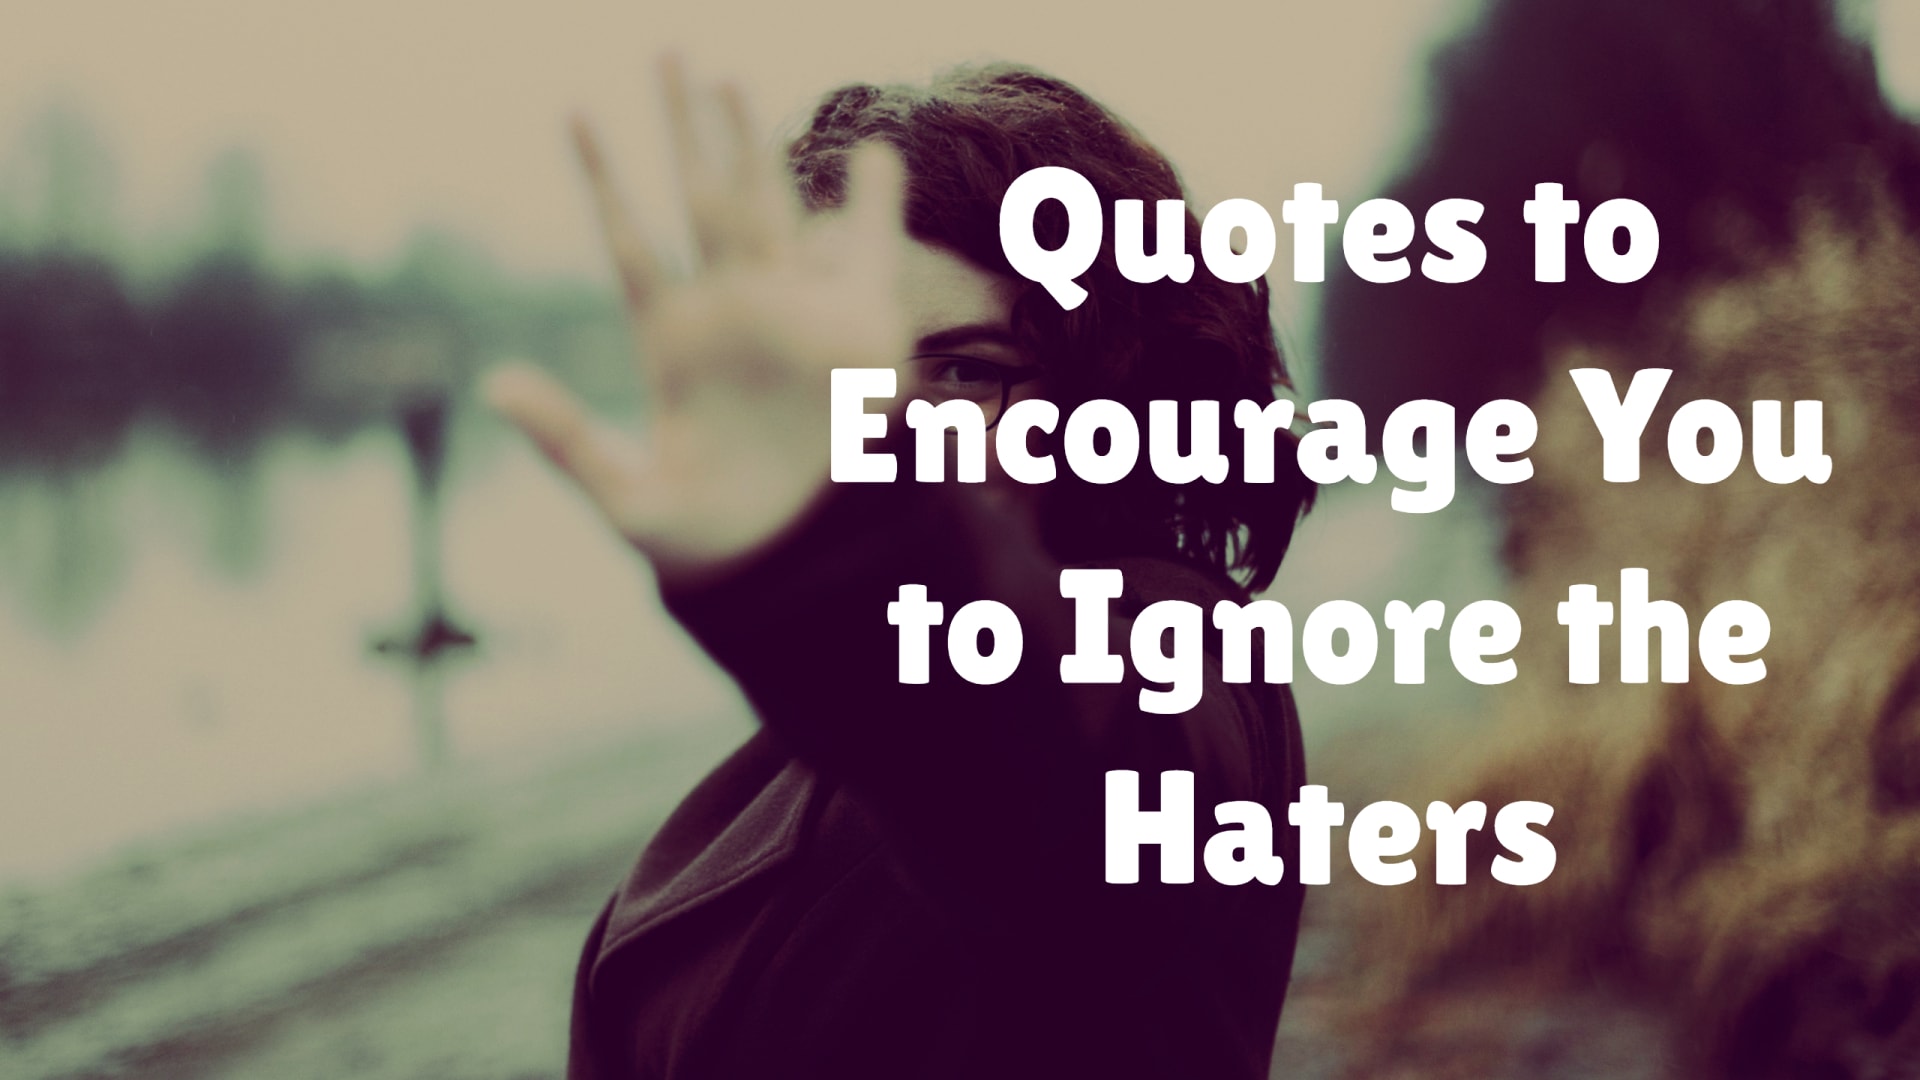 Quotes to Encourage You to Ignore the Haters